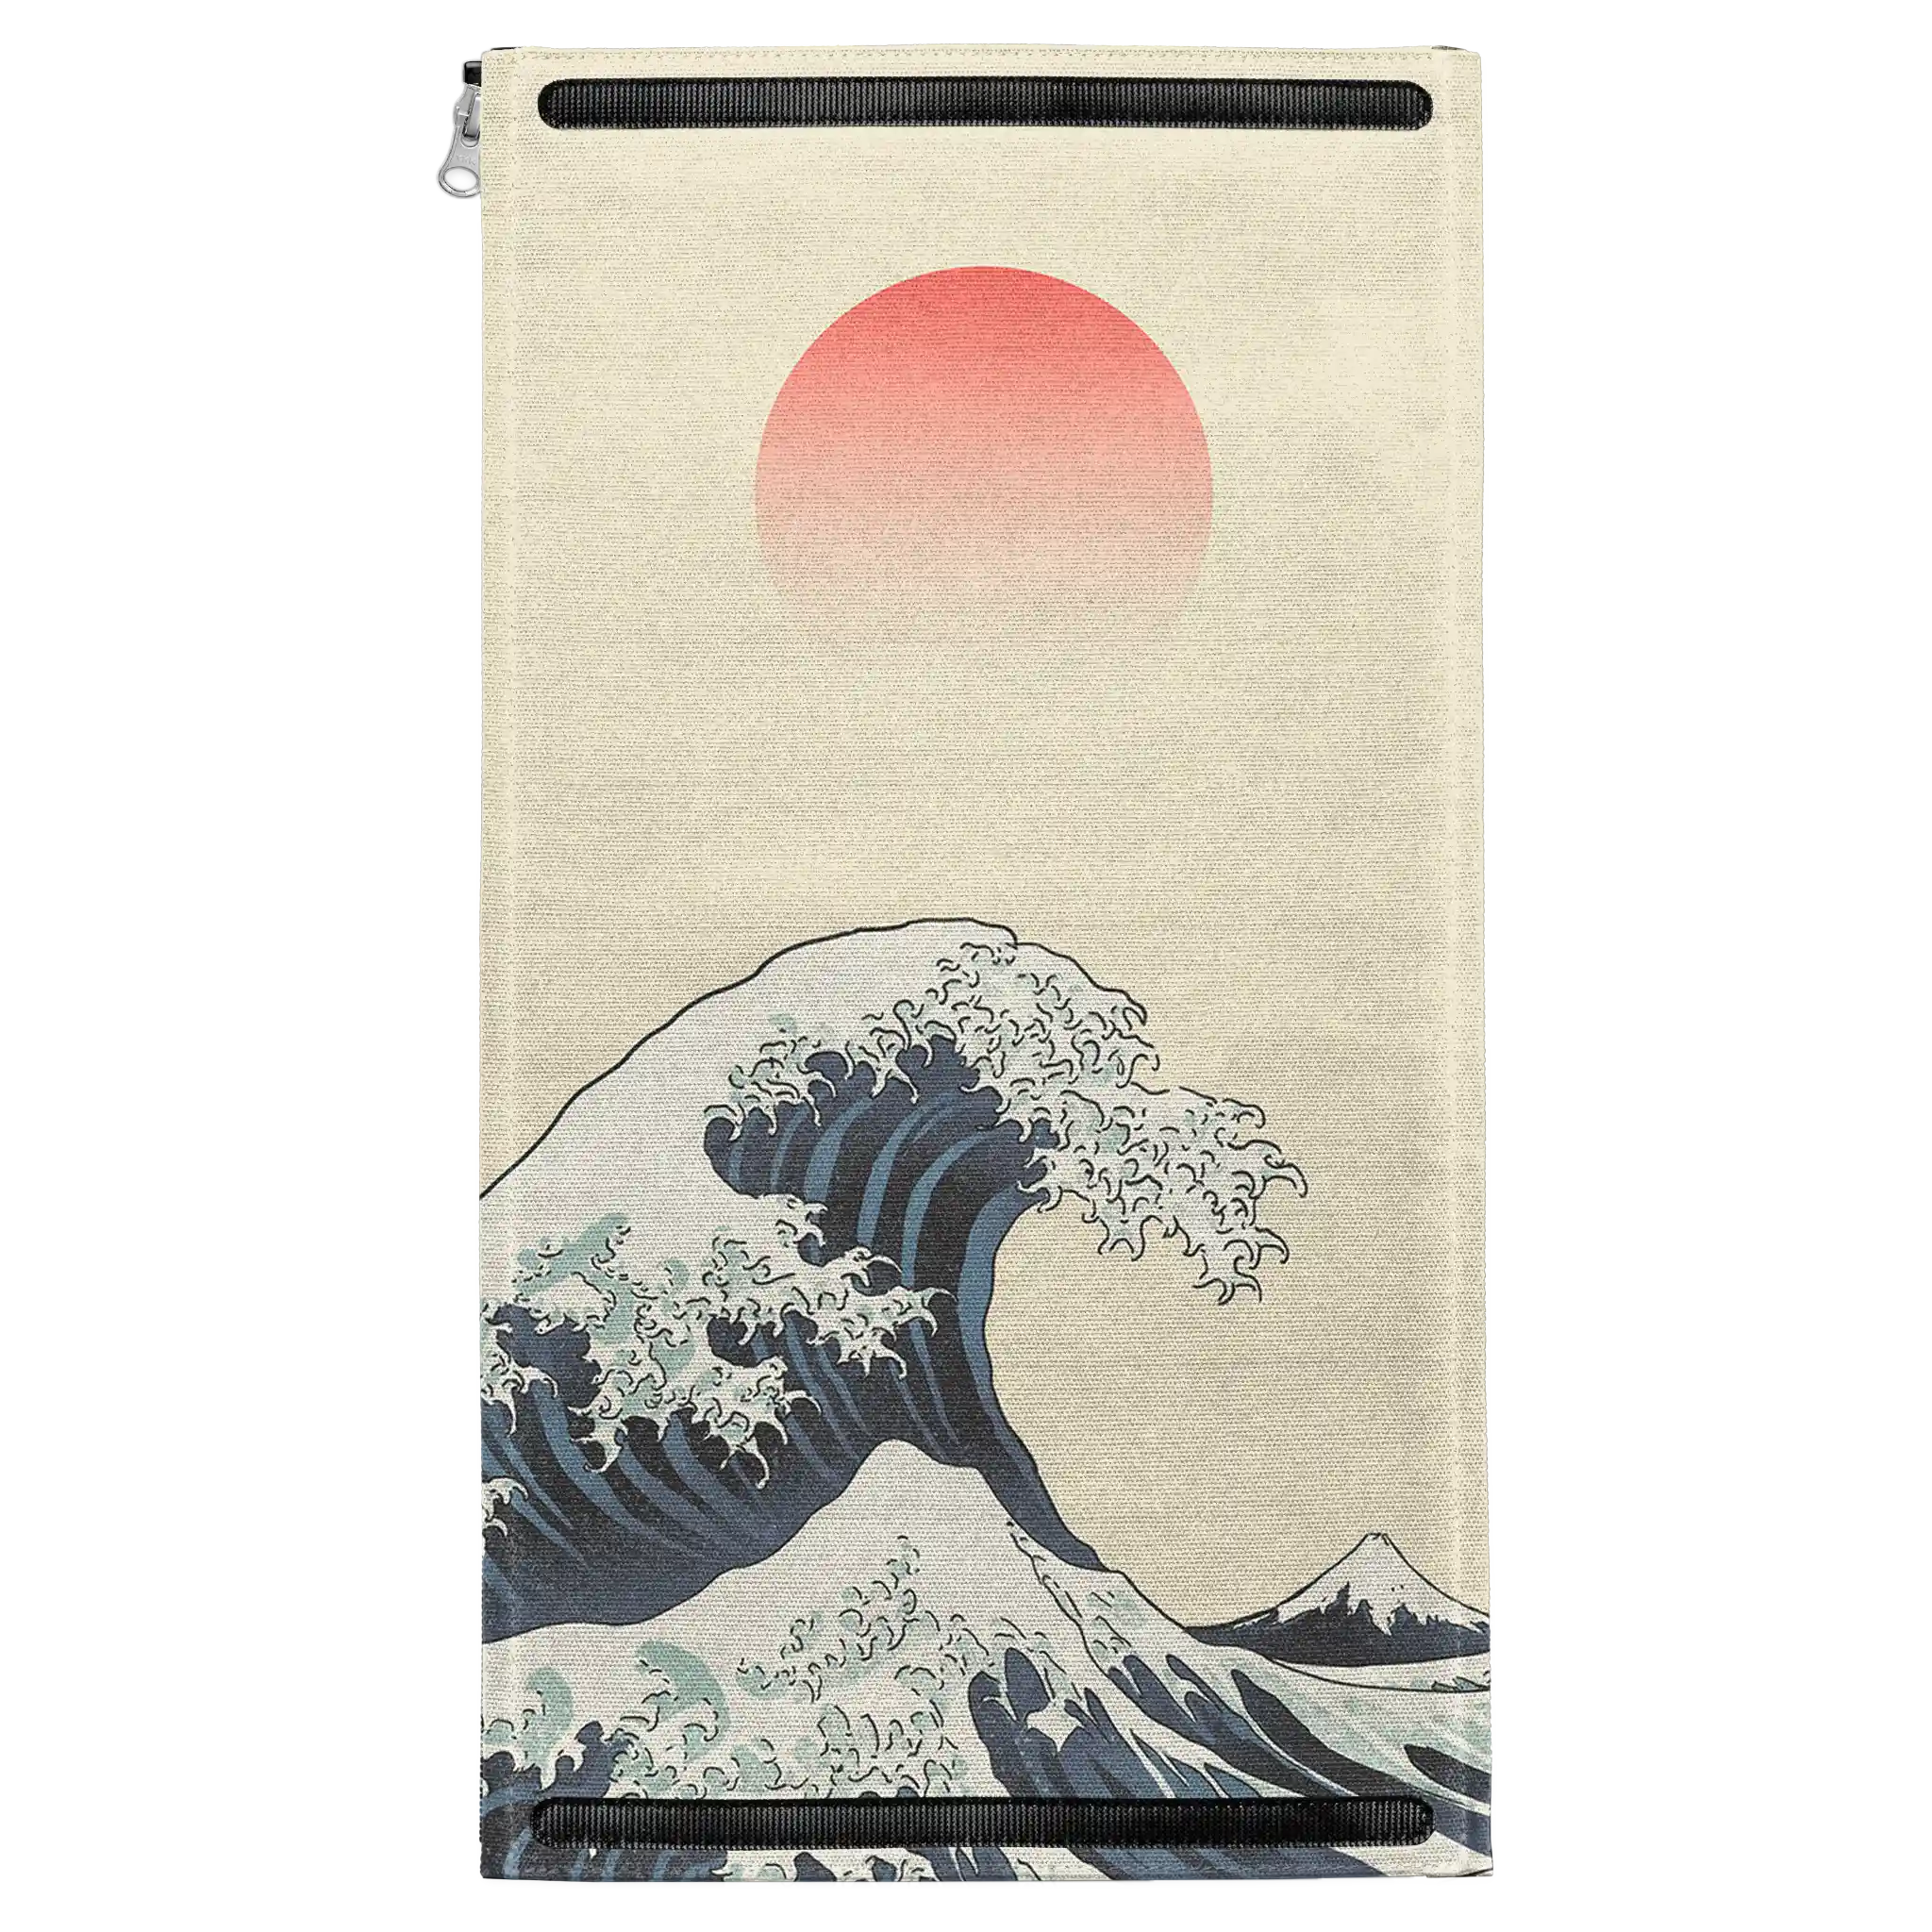 Red Sun Waves Patch